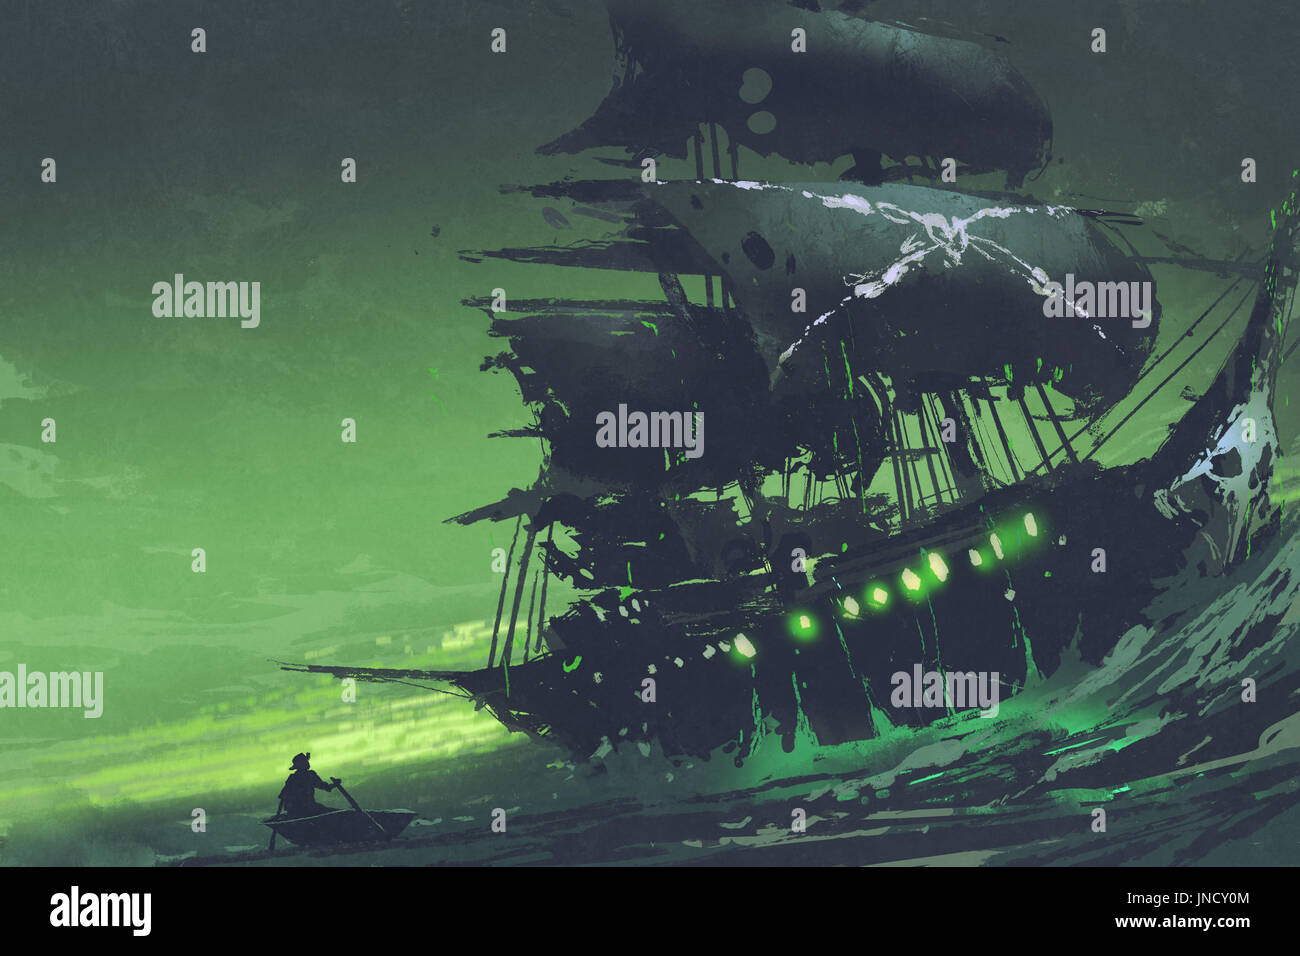 night scene of ghost pirate ship in the sea with mysterious green light, Flying Dutchman, digital art style, illustration painting Stock Photo